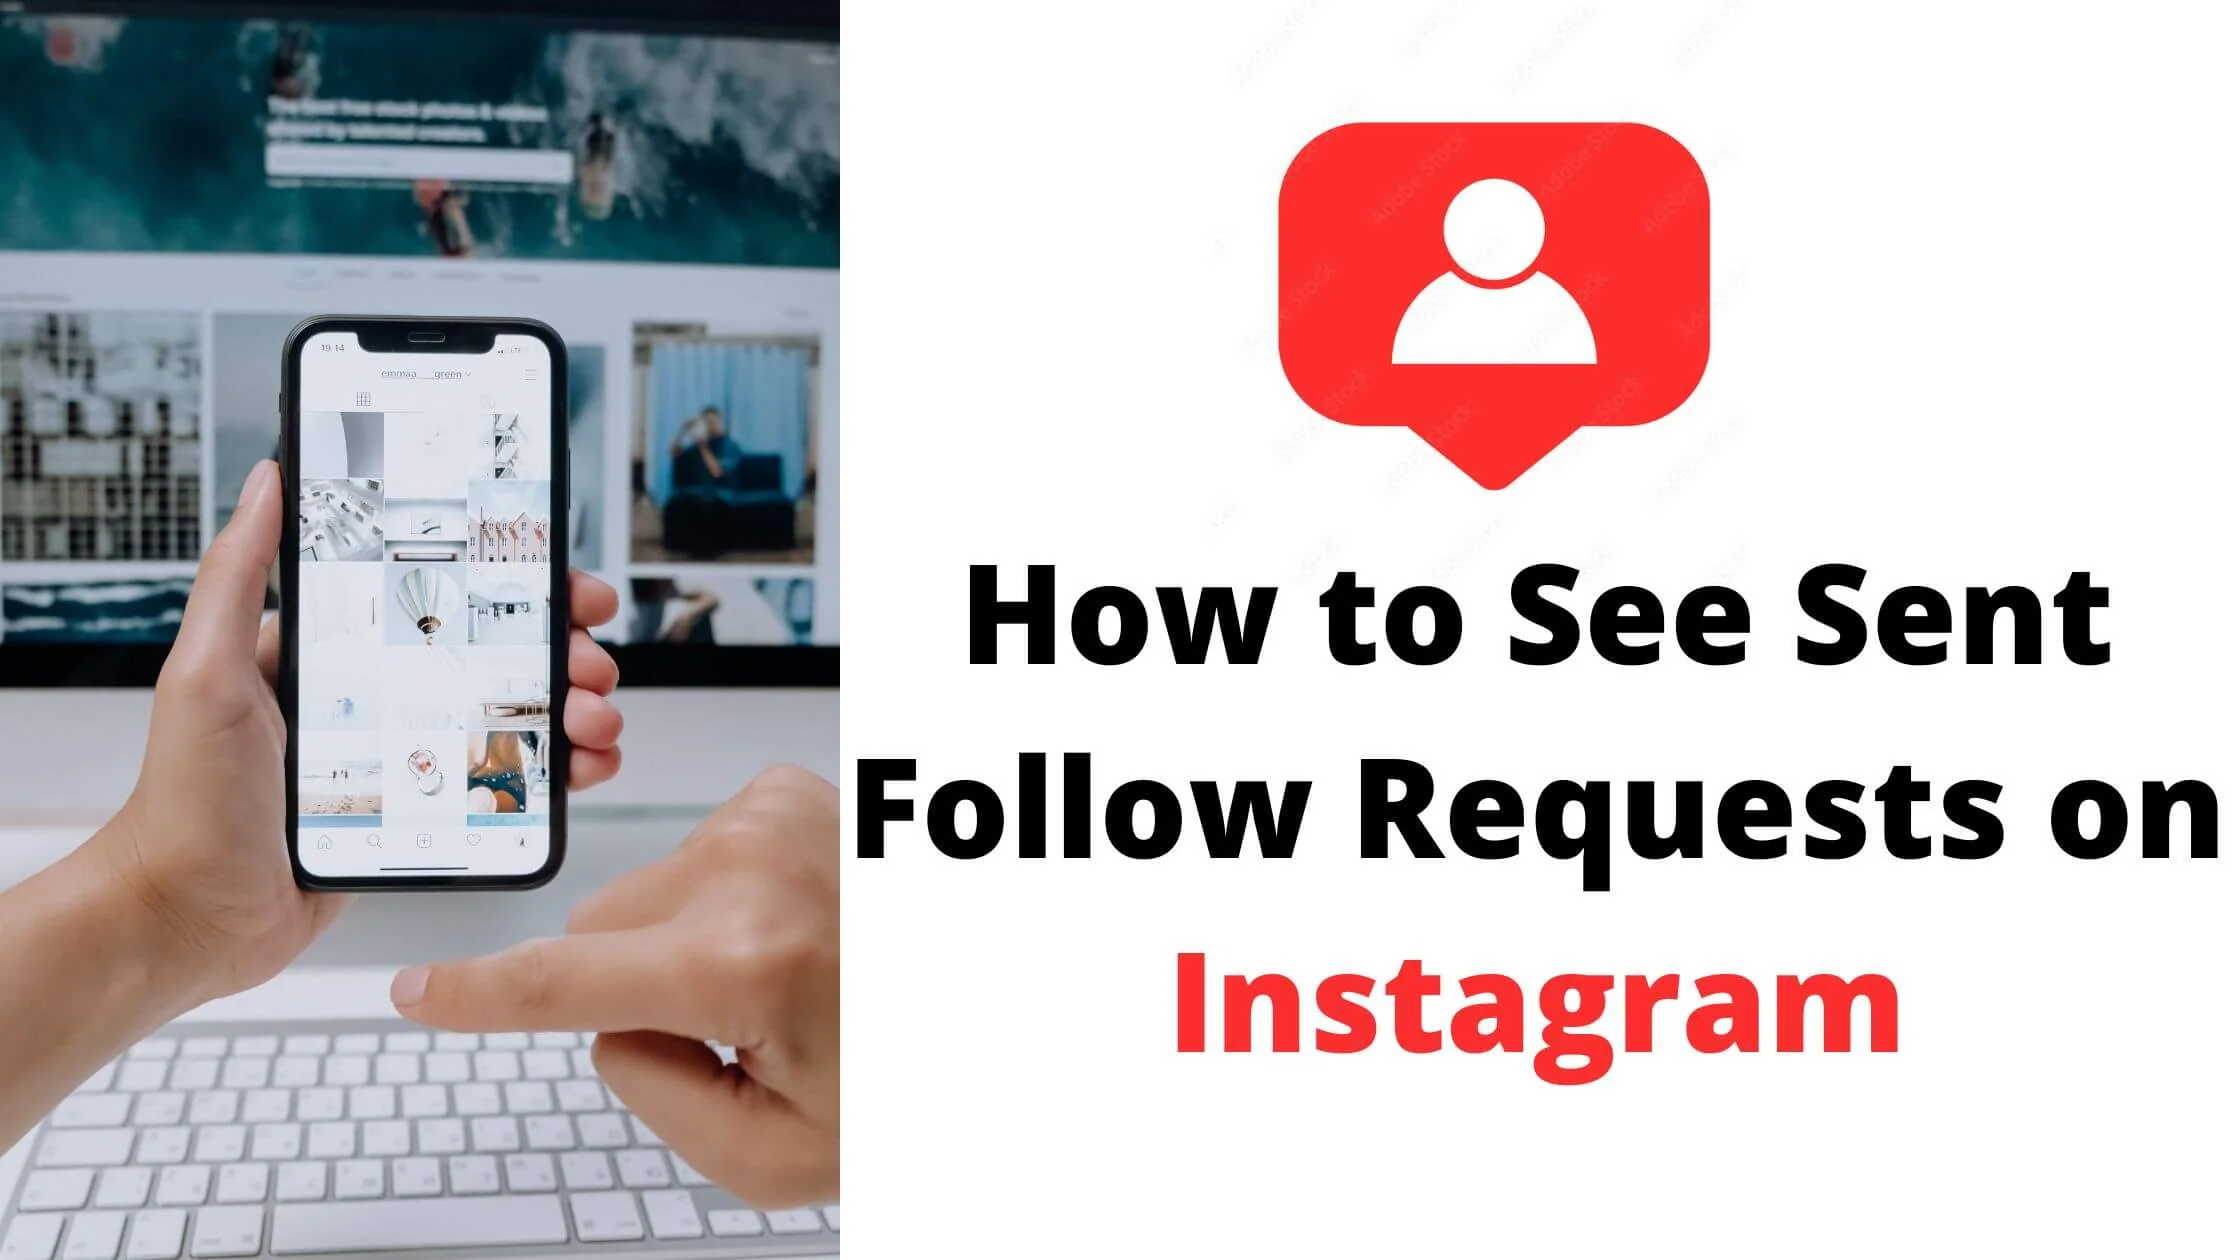 See Sent Follow Requests on Instagram